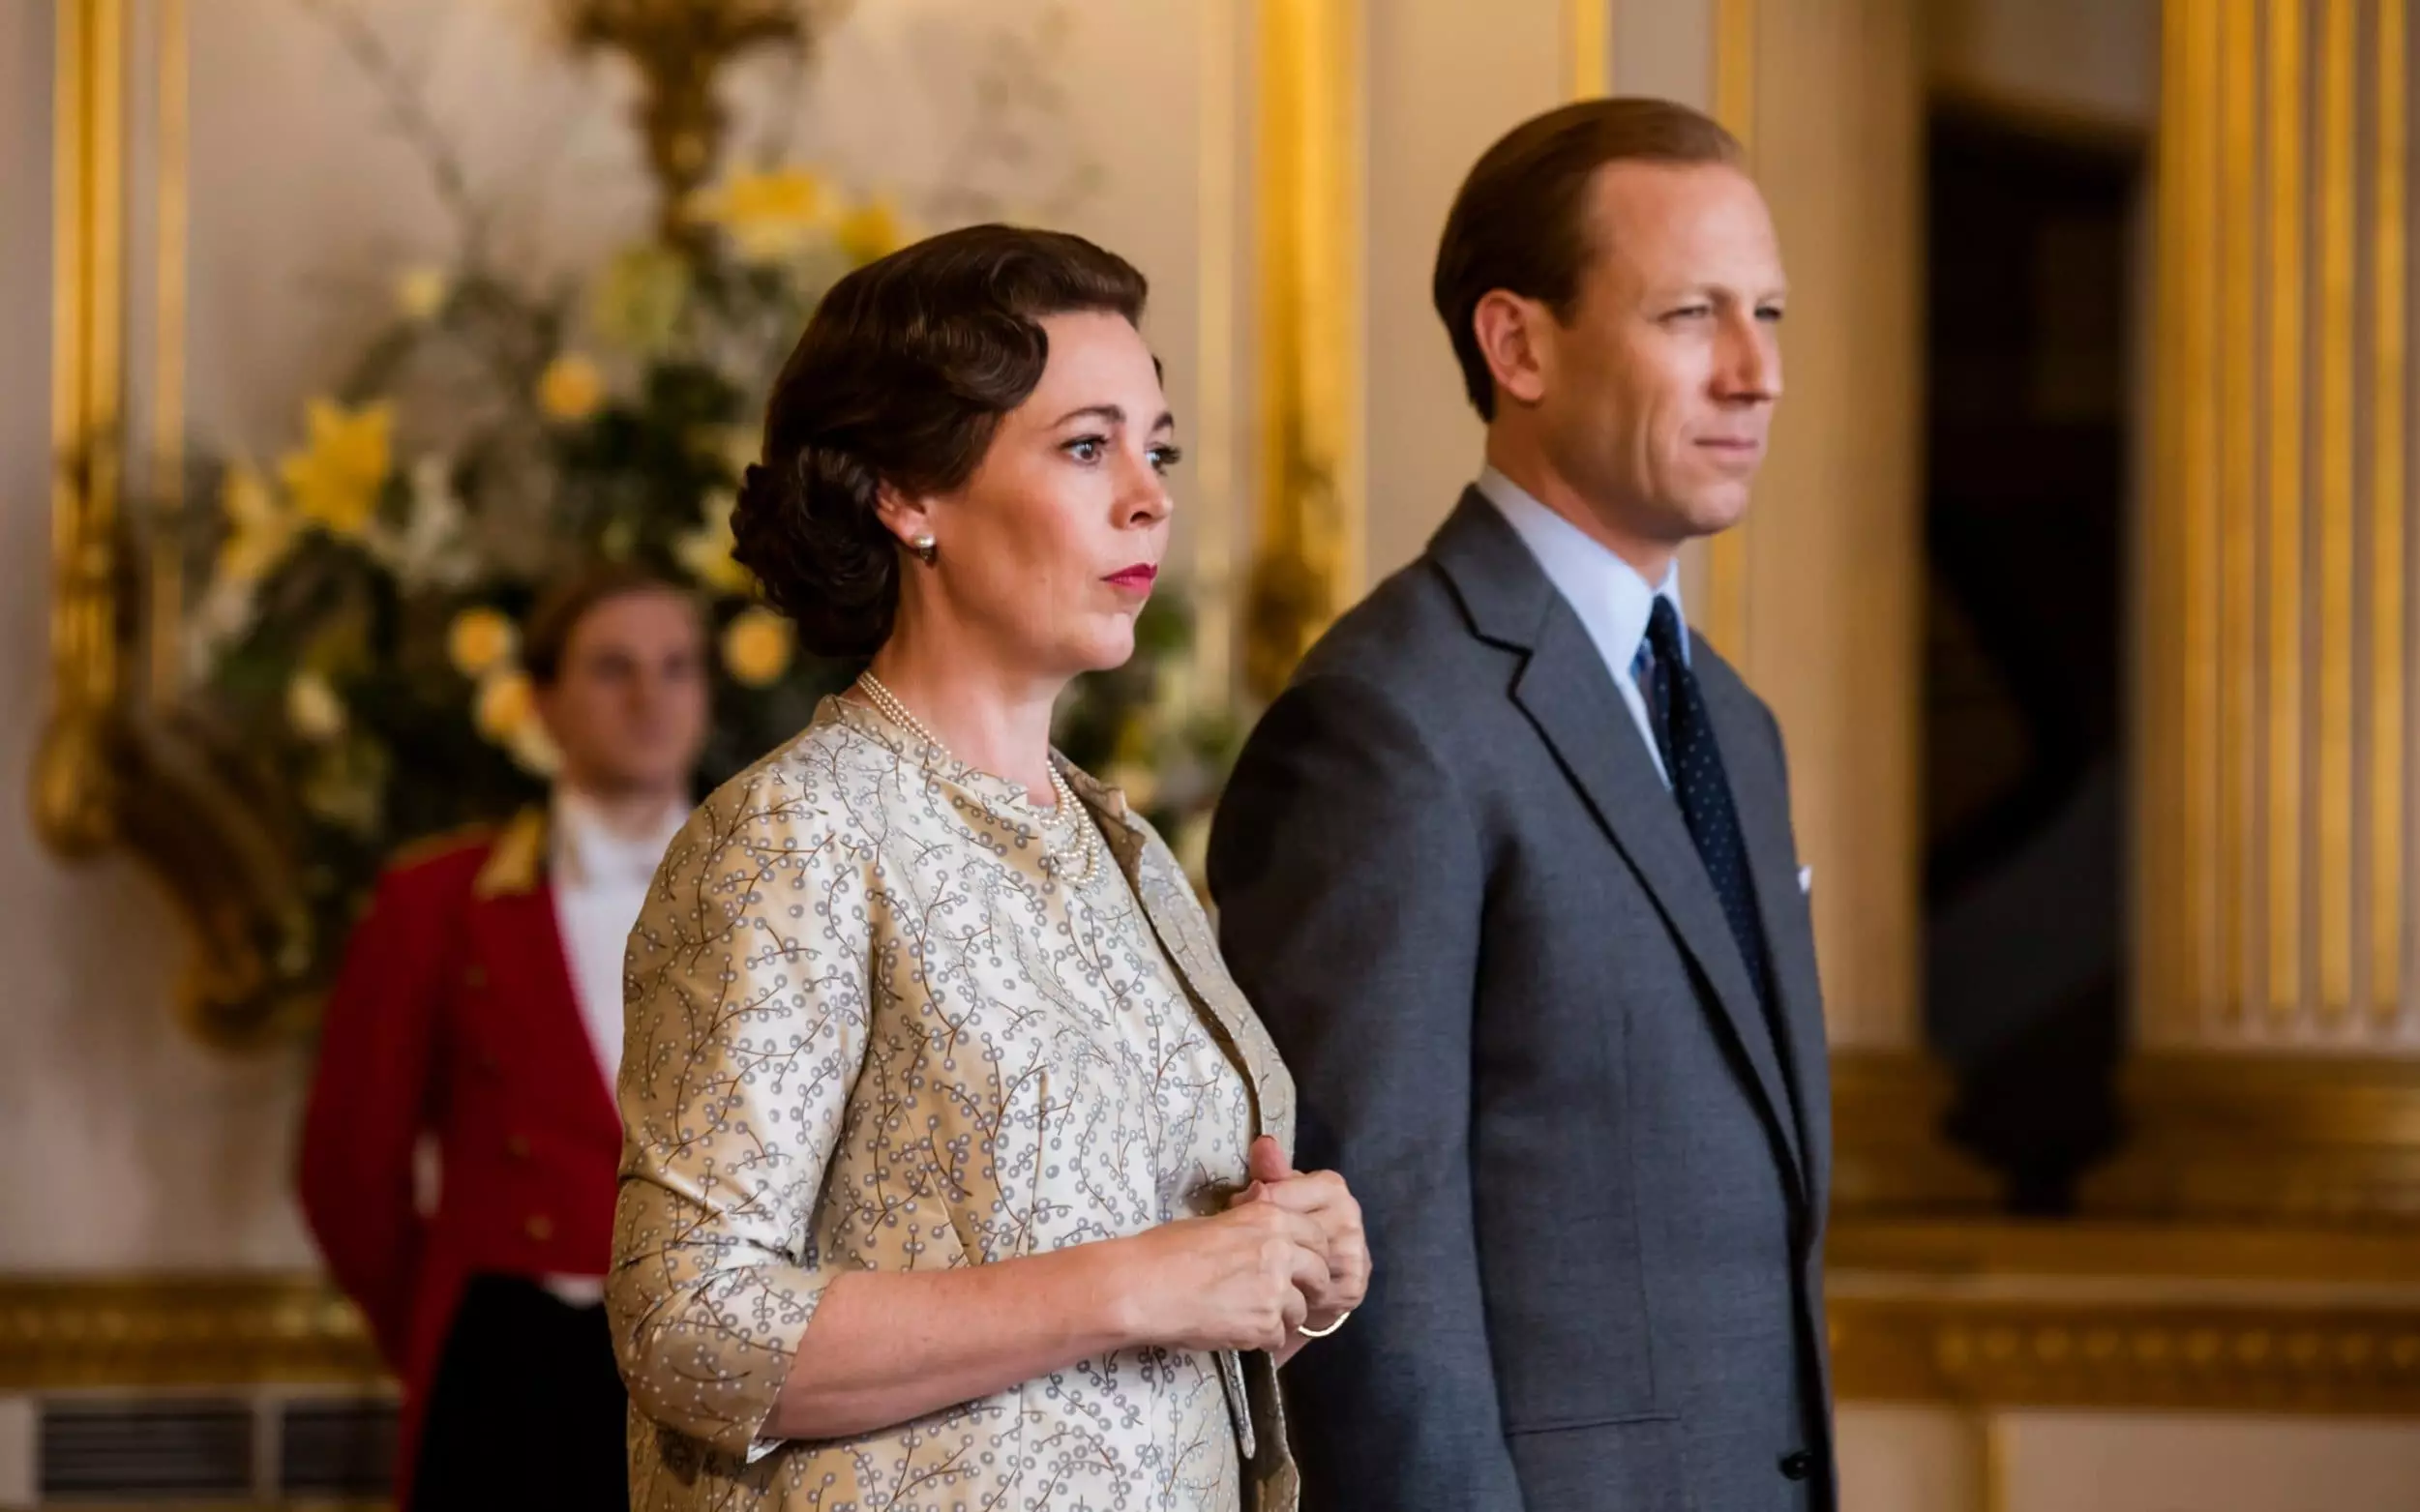 Olivia Colman and Tobias Menzies in season 3 of The Crown (